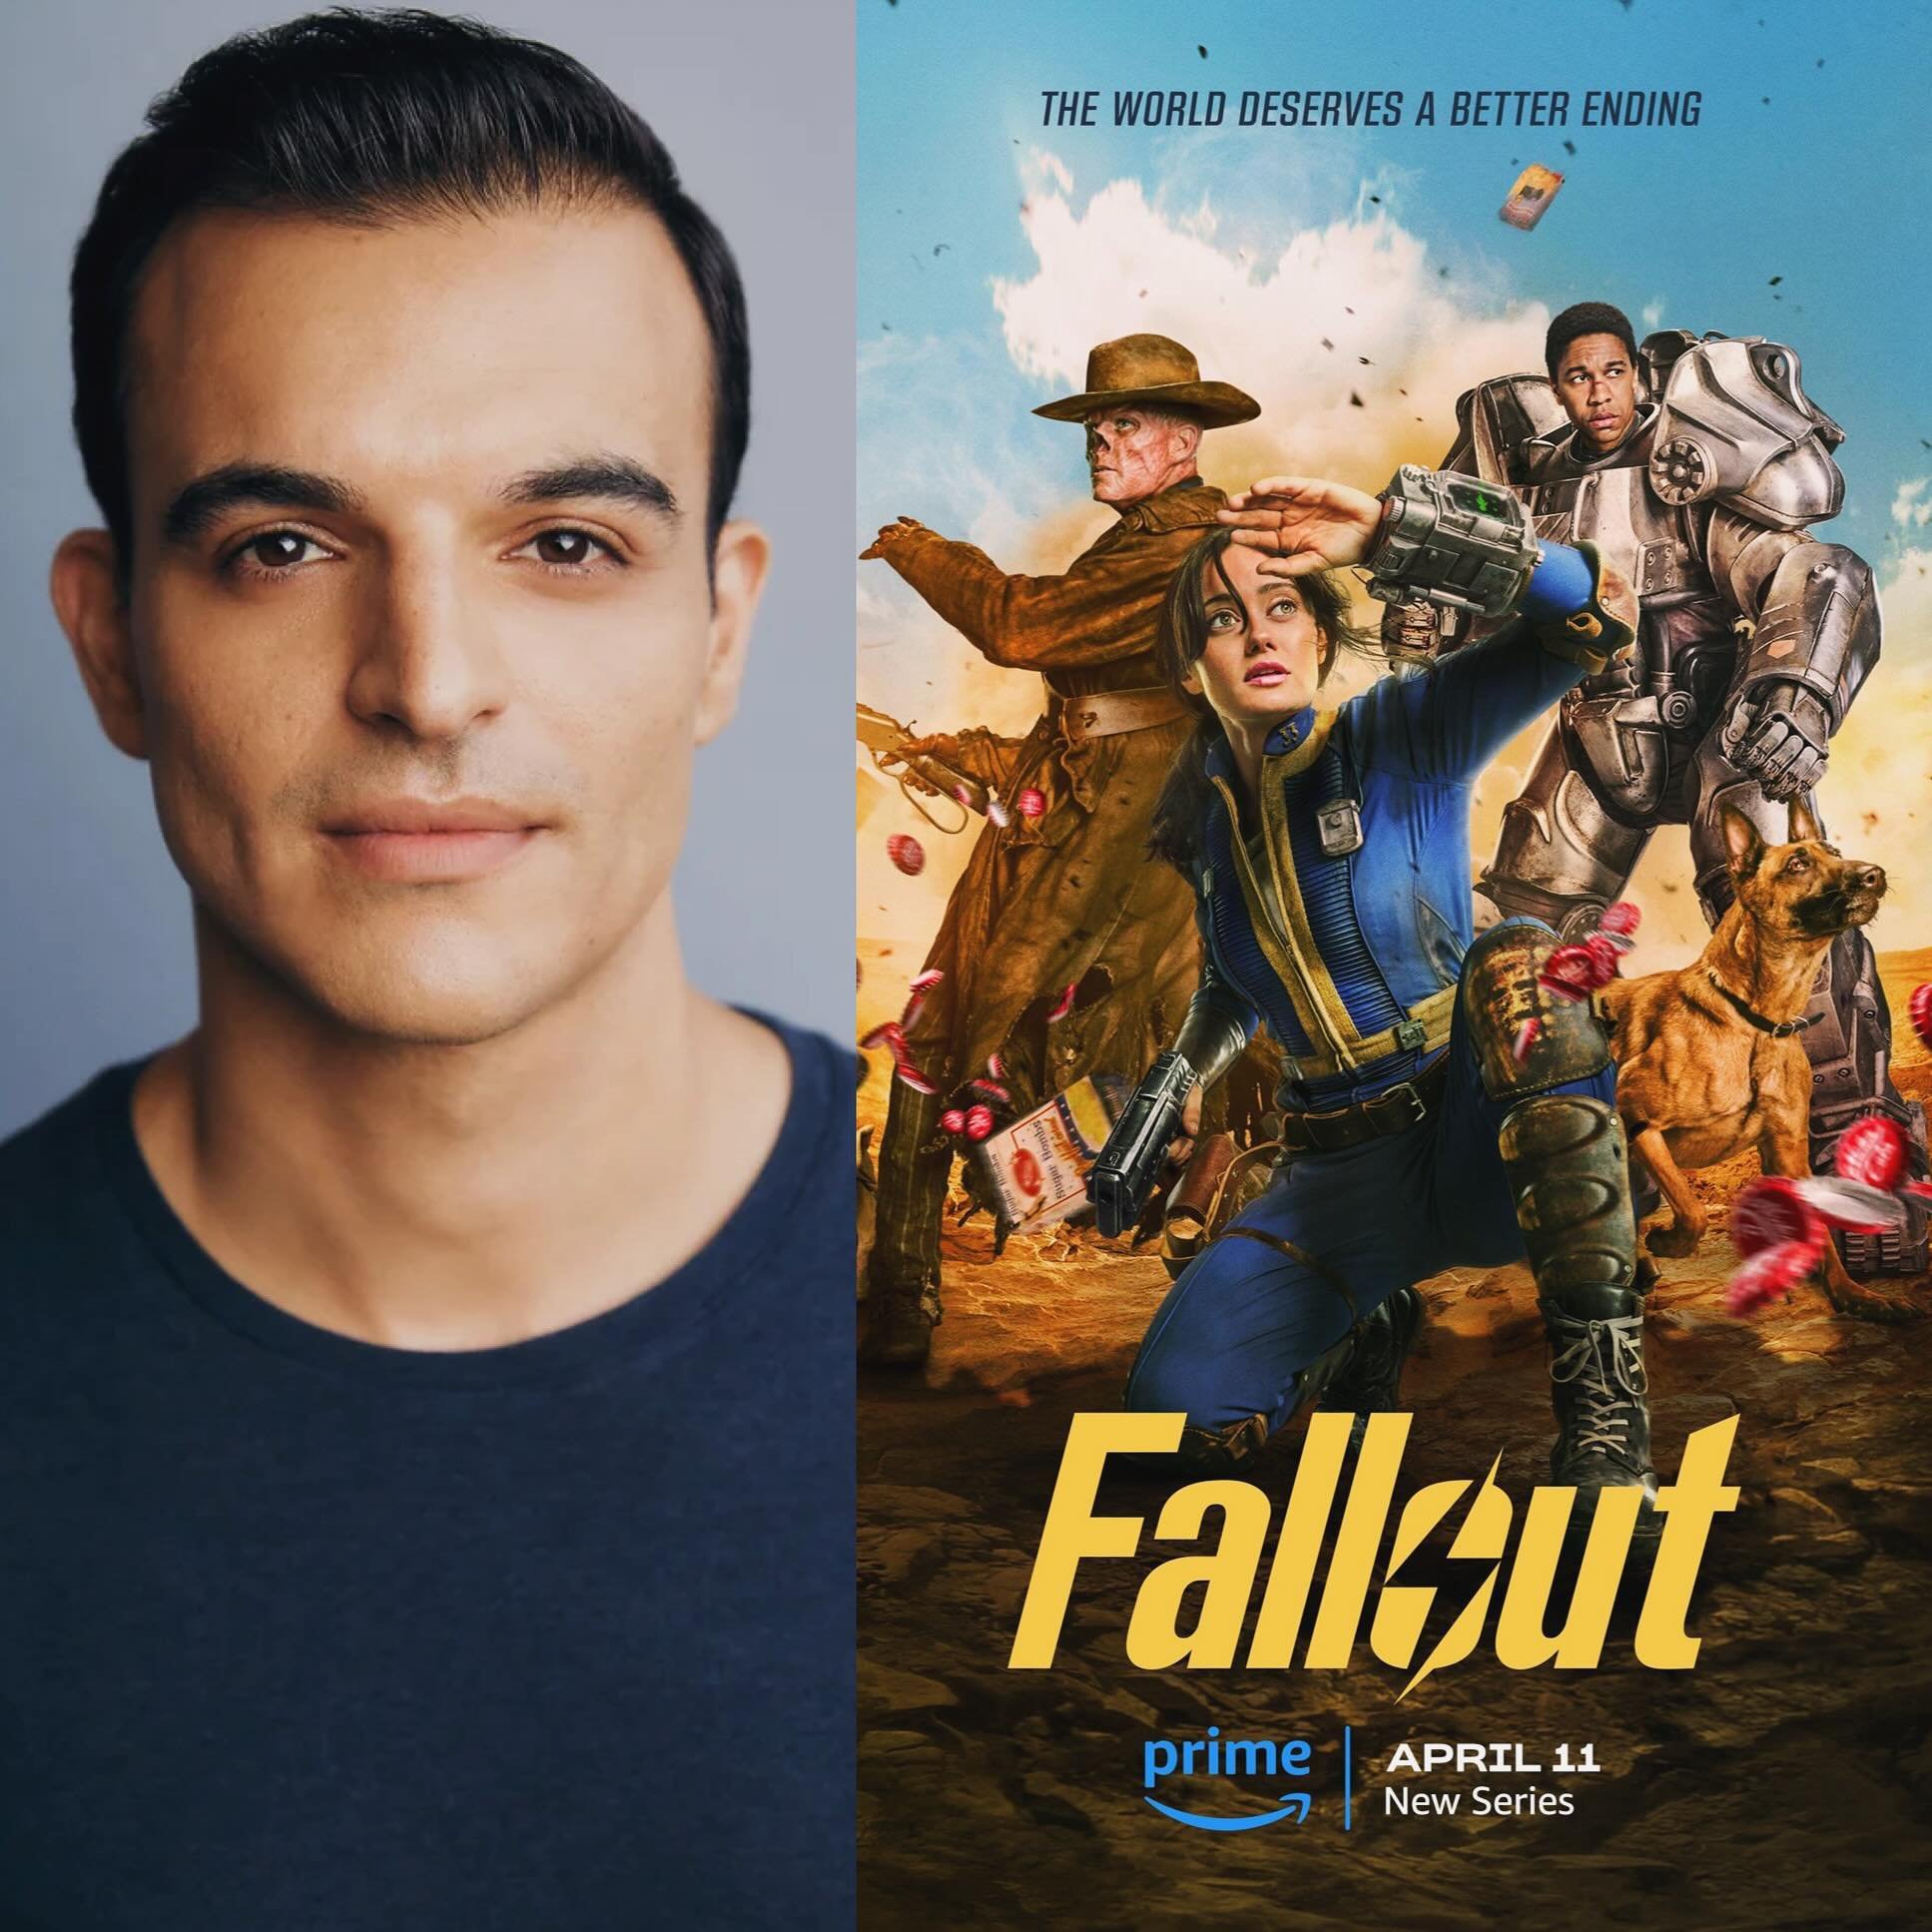 All episodes of FALLOUT are streaming now on @amazonprime - don&rsquo;t miss @agp3733! ⭐️